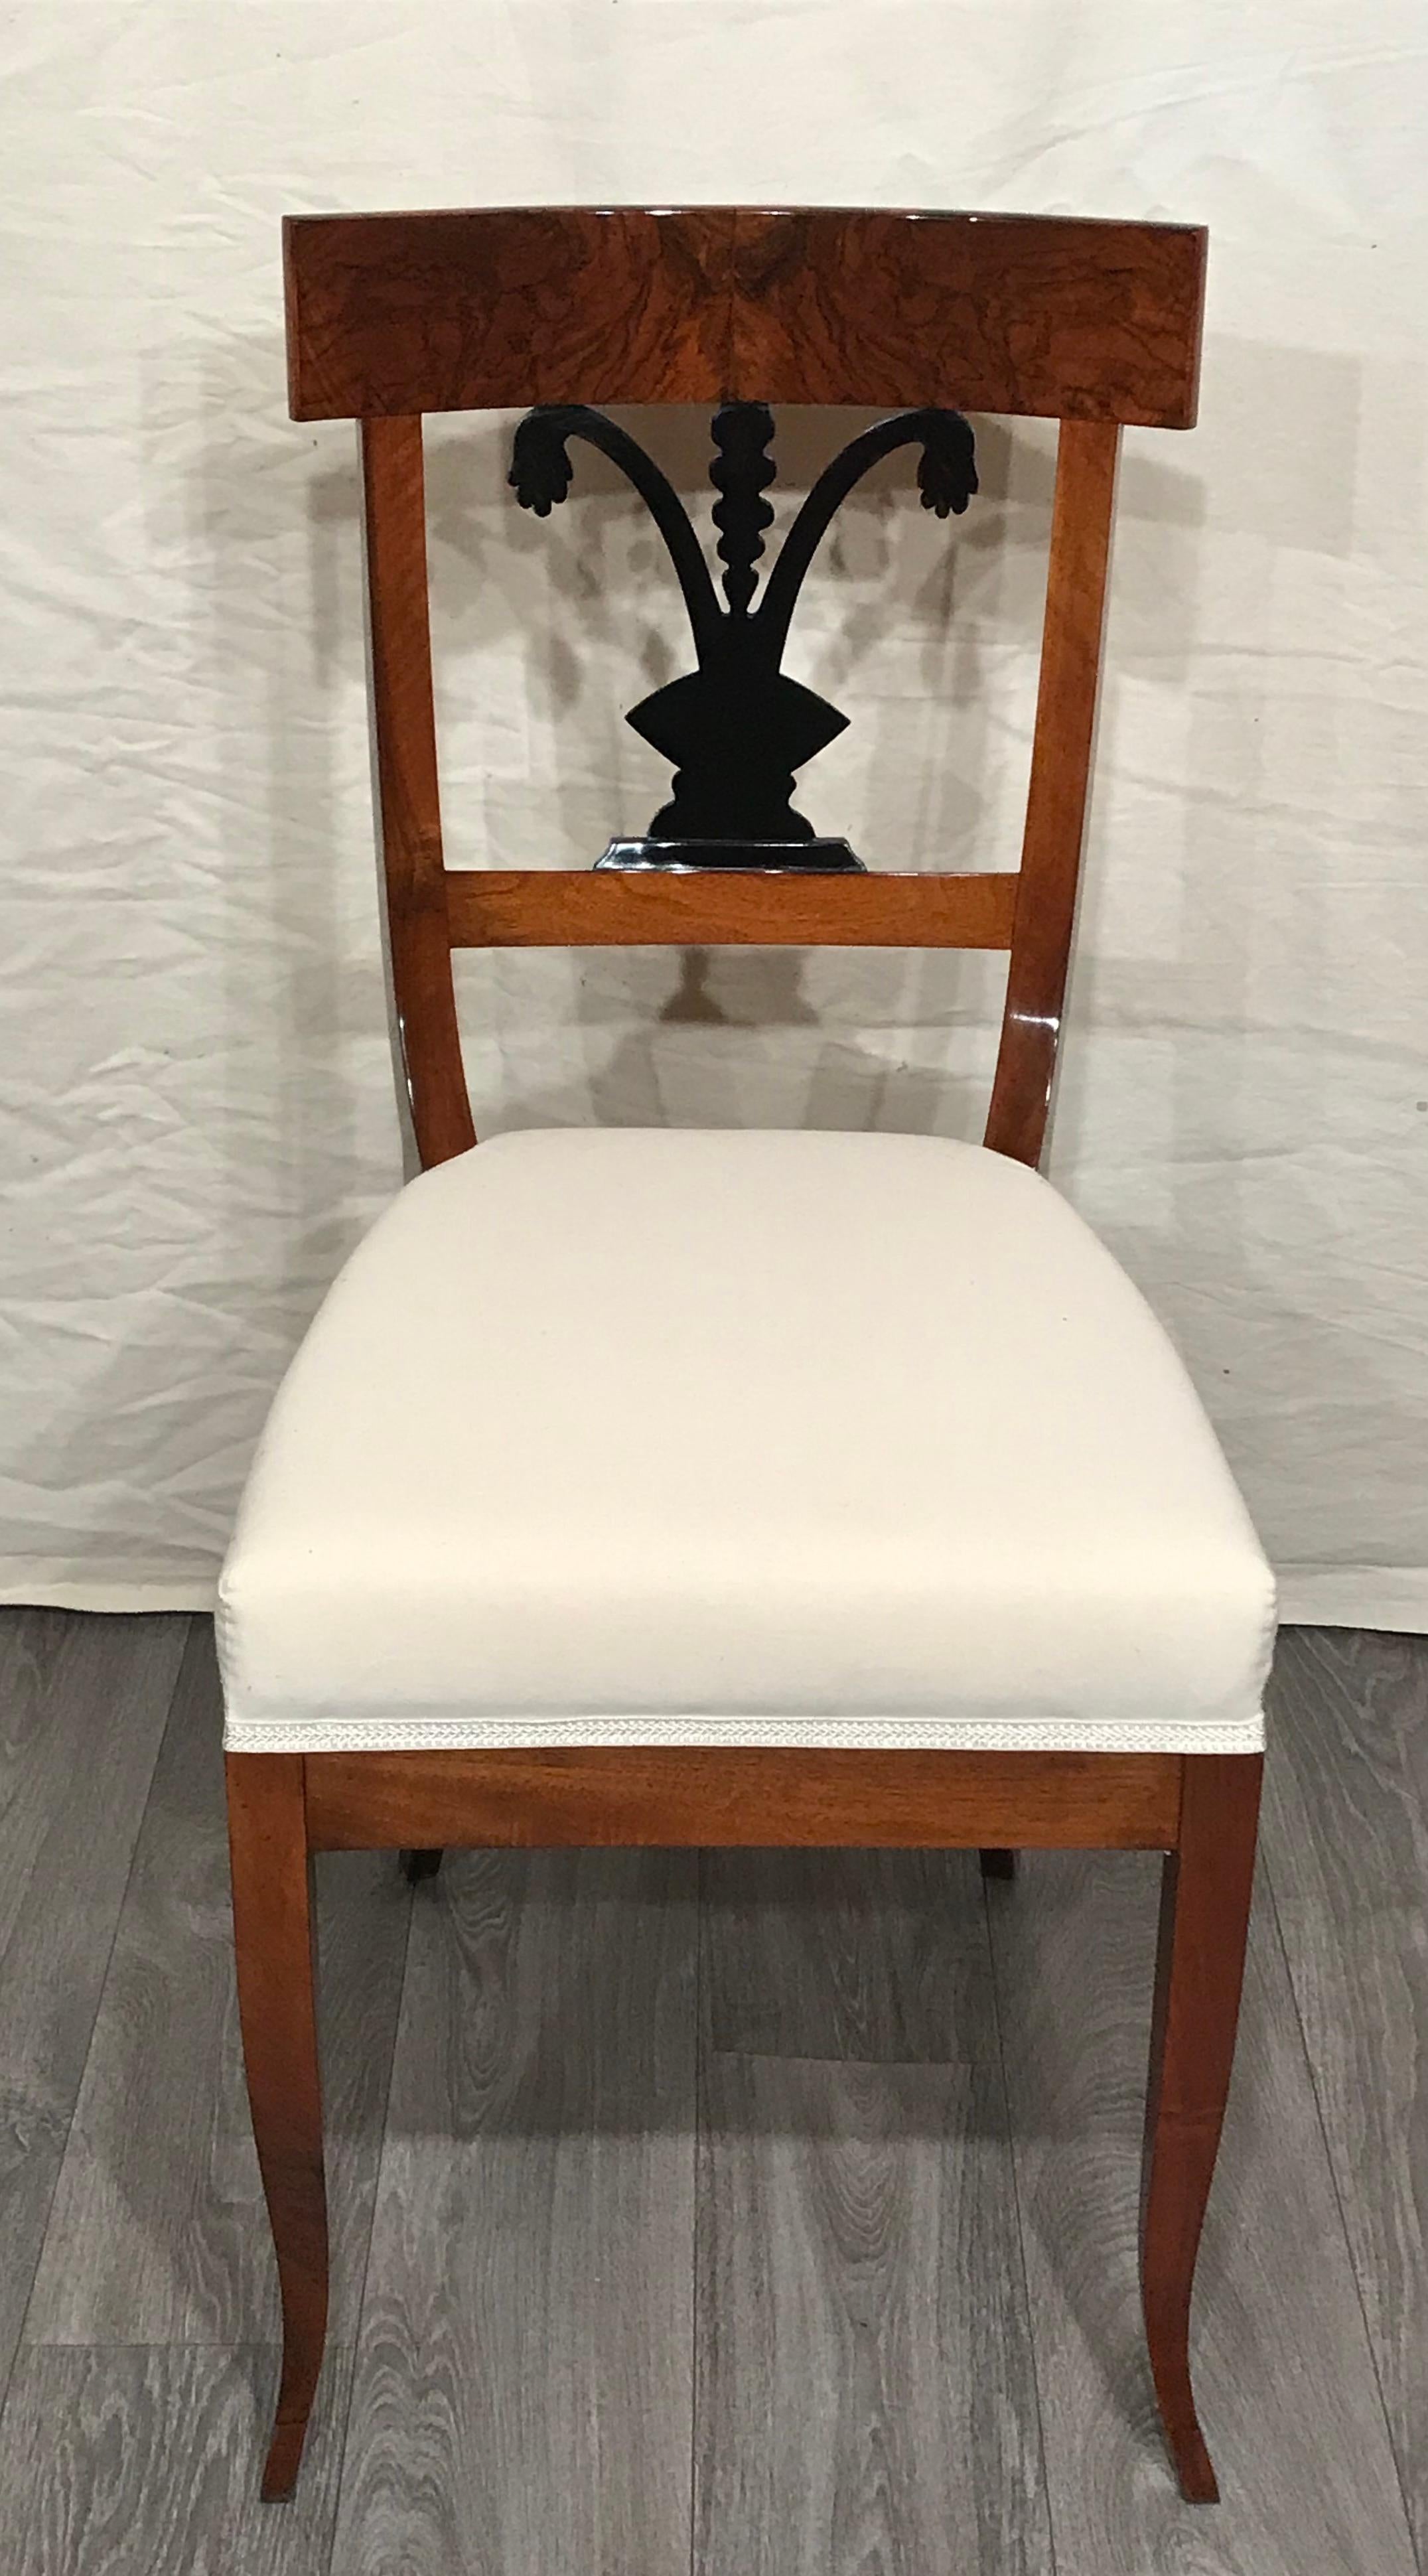 This beautiful pair of Biedermeier chairs comes newly refinished and with a new upholstery. The chairs date back to 1820 and come from Southern Germany. The walnut chairs have a beautiful designed back with ebonized details. 